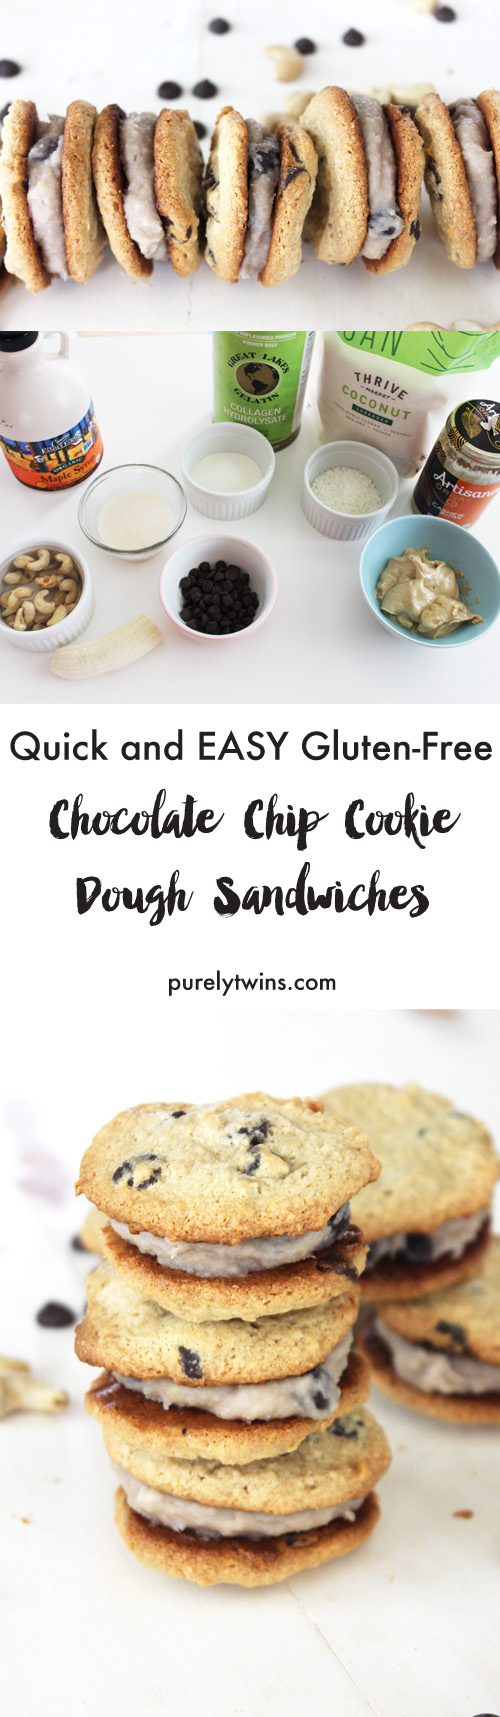 Your cookie dough dreams have just been answered An easy recipe for gluten-free dairy-free chocolate chip cookie dough sandwiches. Two soft chocolate chip cashew cookies sandwiched with egg free cookie dough frosting! So easy to make and ready in less than 20 minutes. 